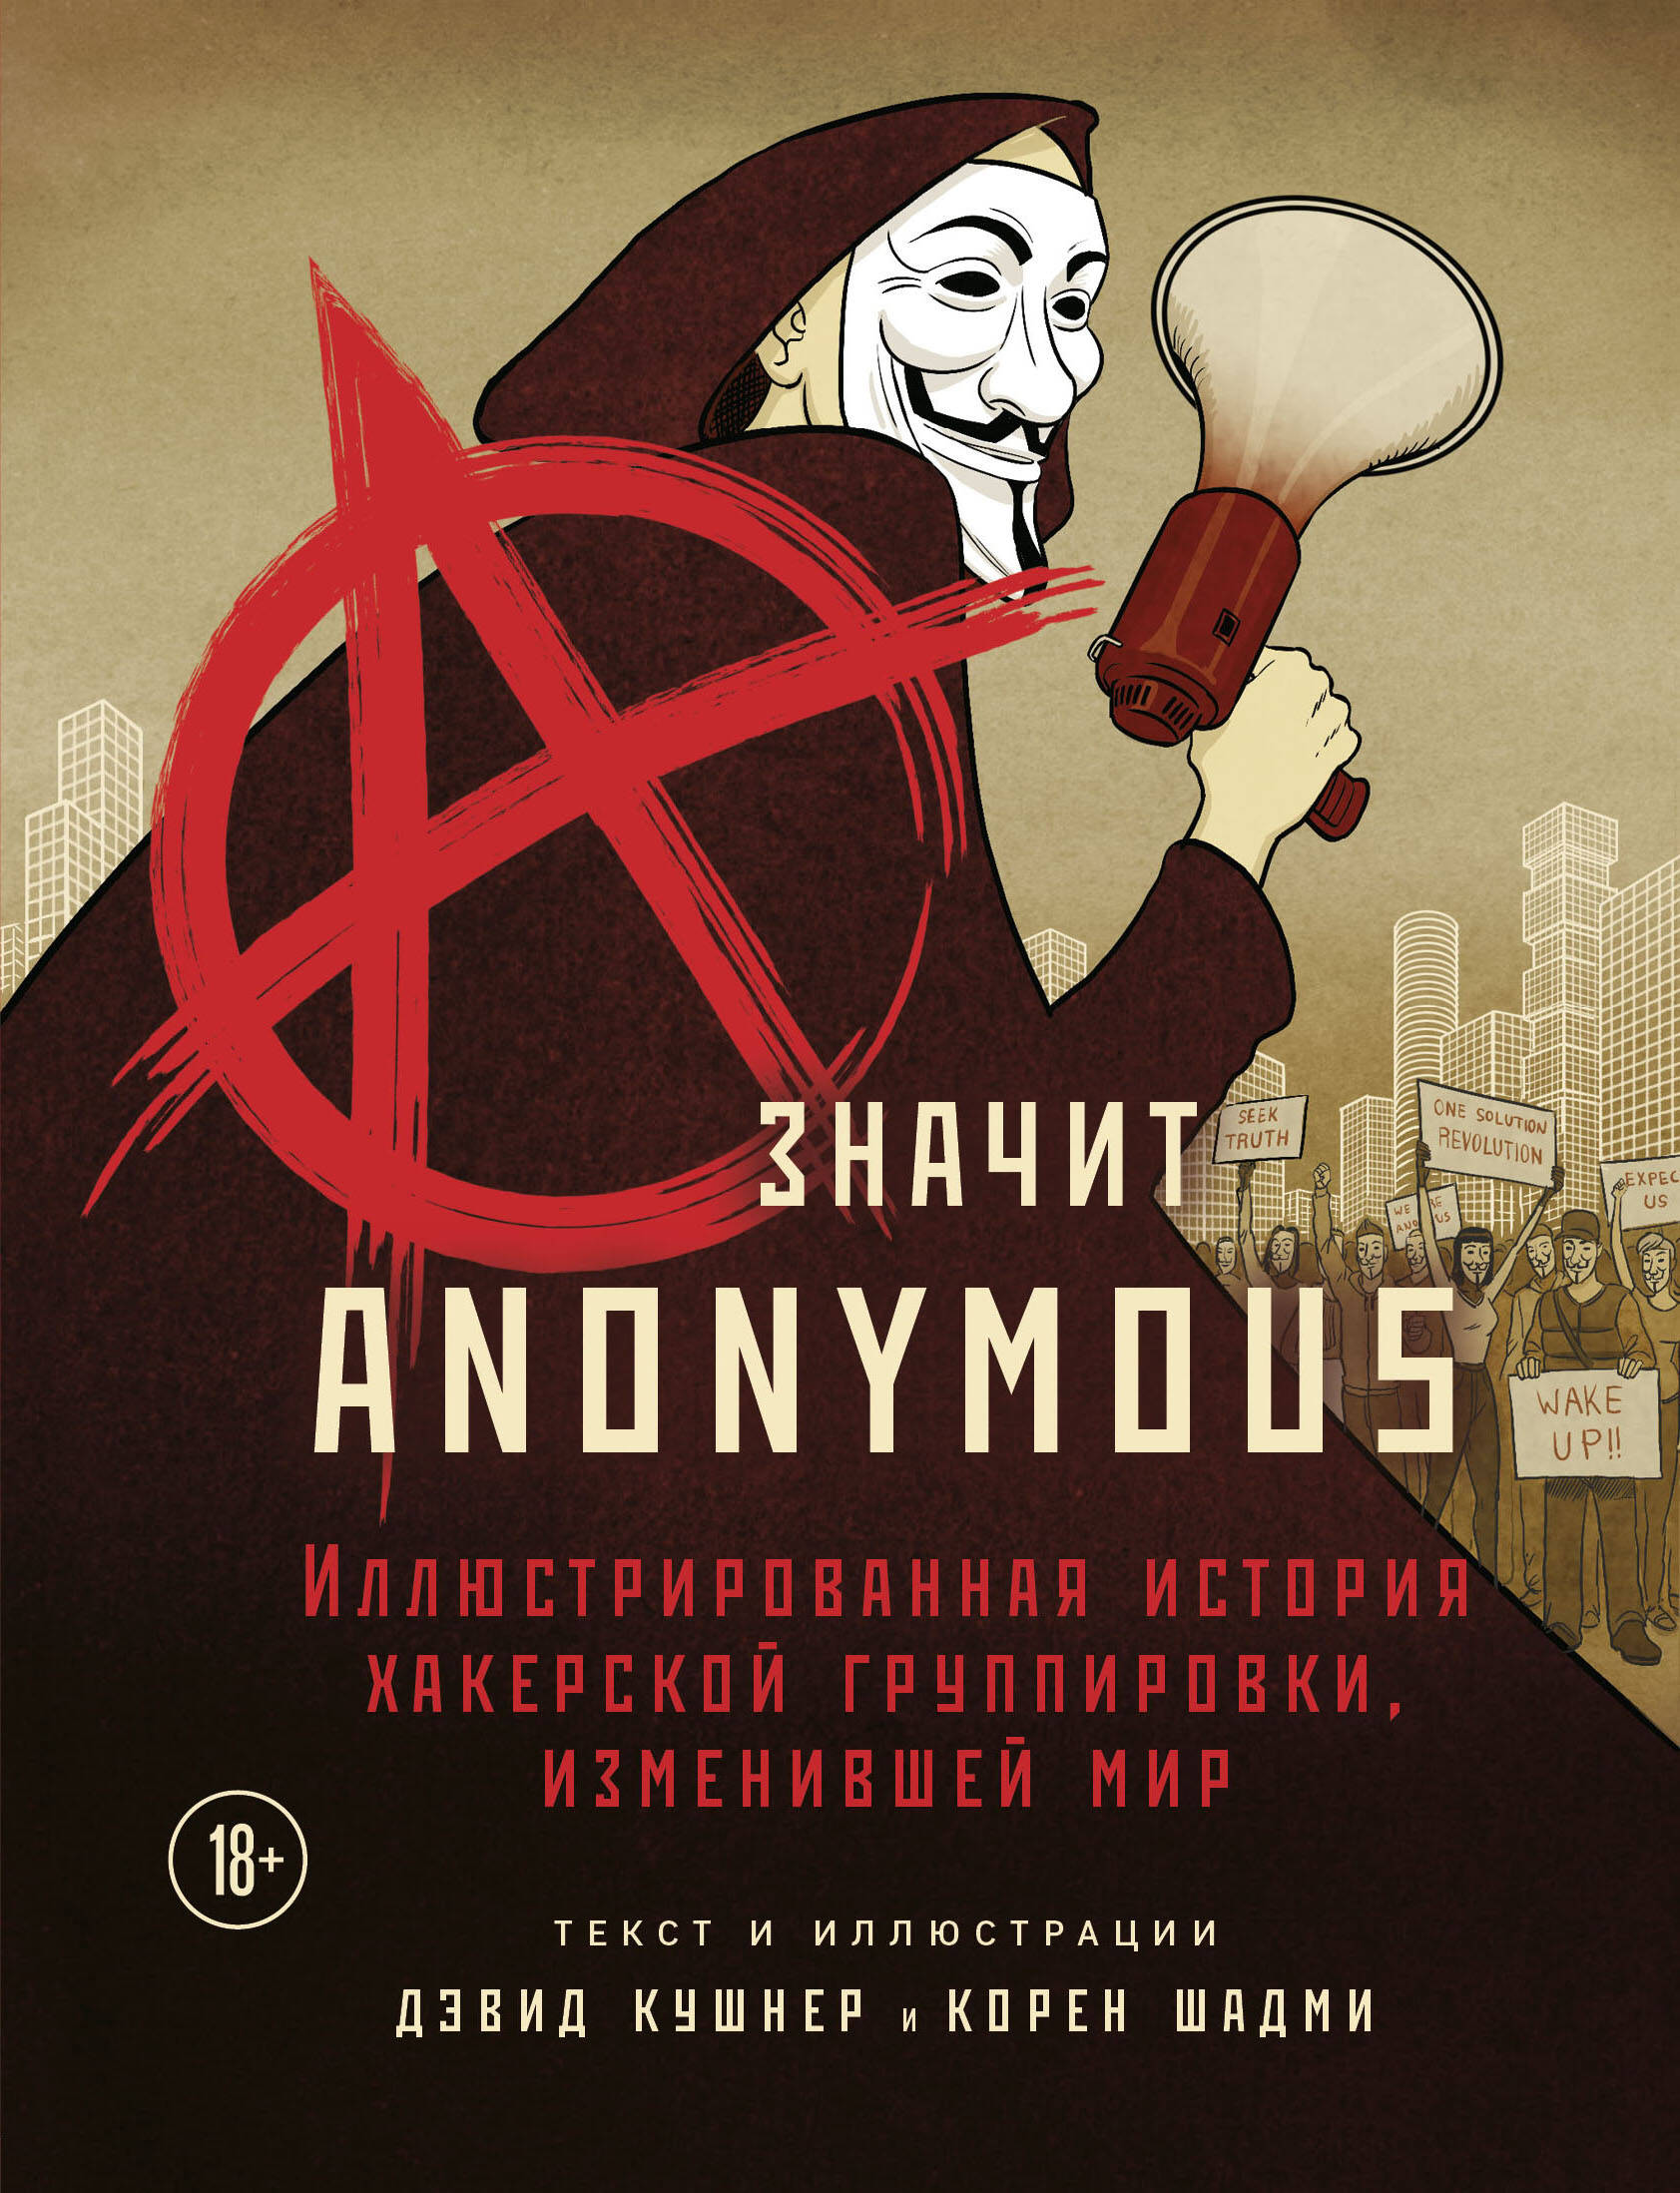 A -  Anonymous.    ,  